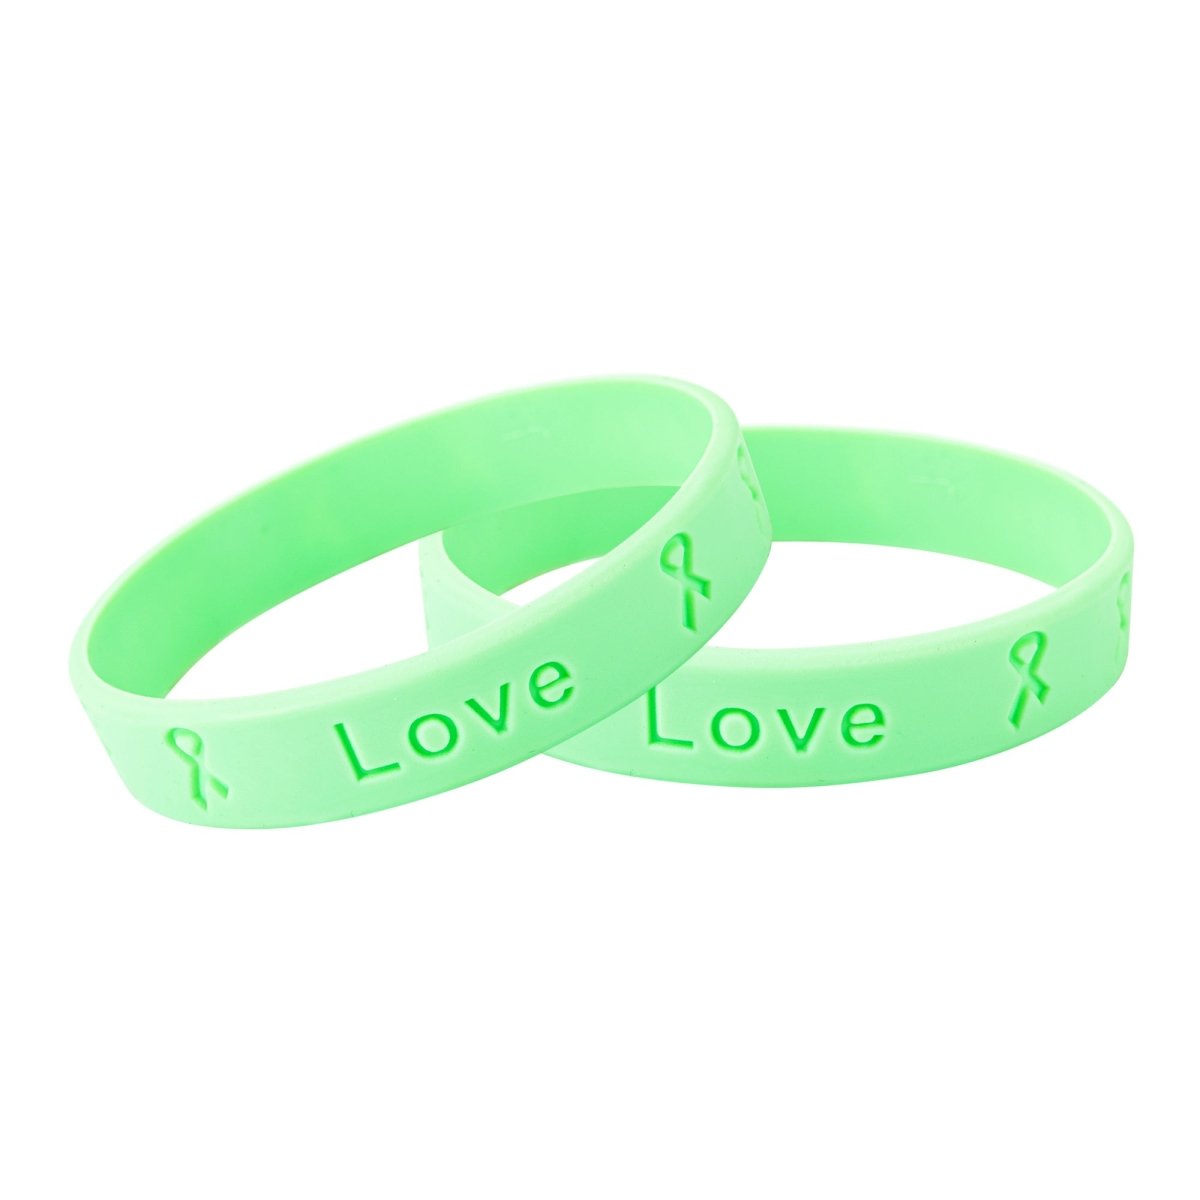 Adult Light Green Silicone Bracelet Wristbands - Fundraising For A Cause